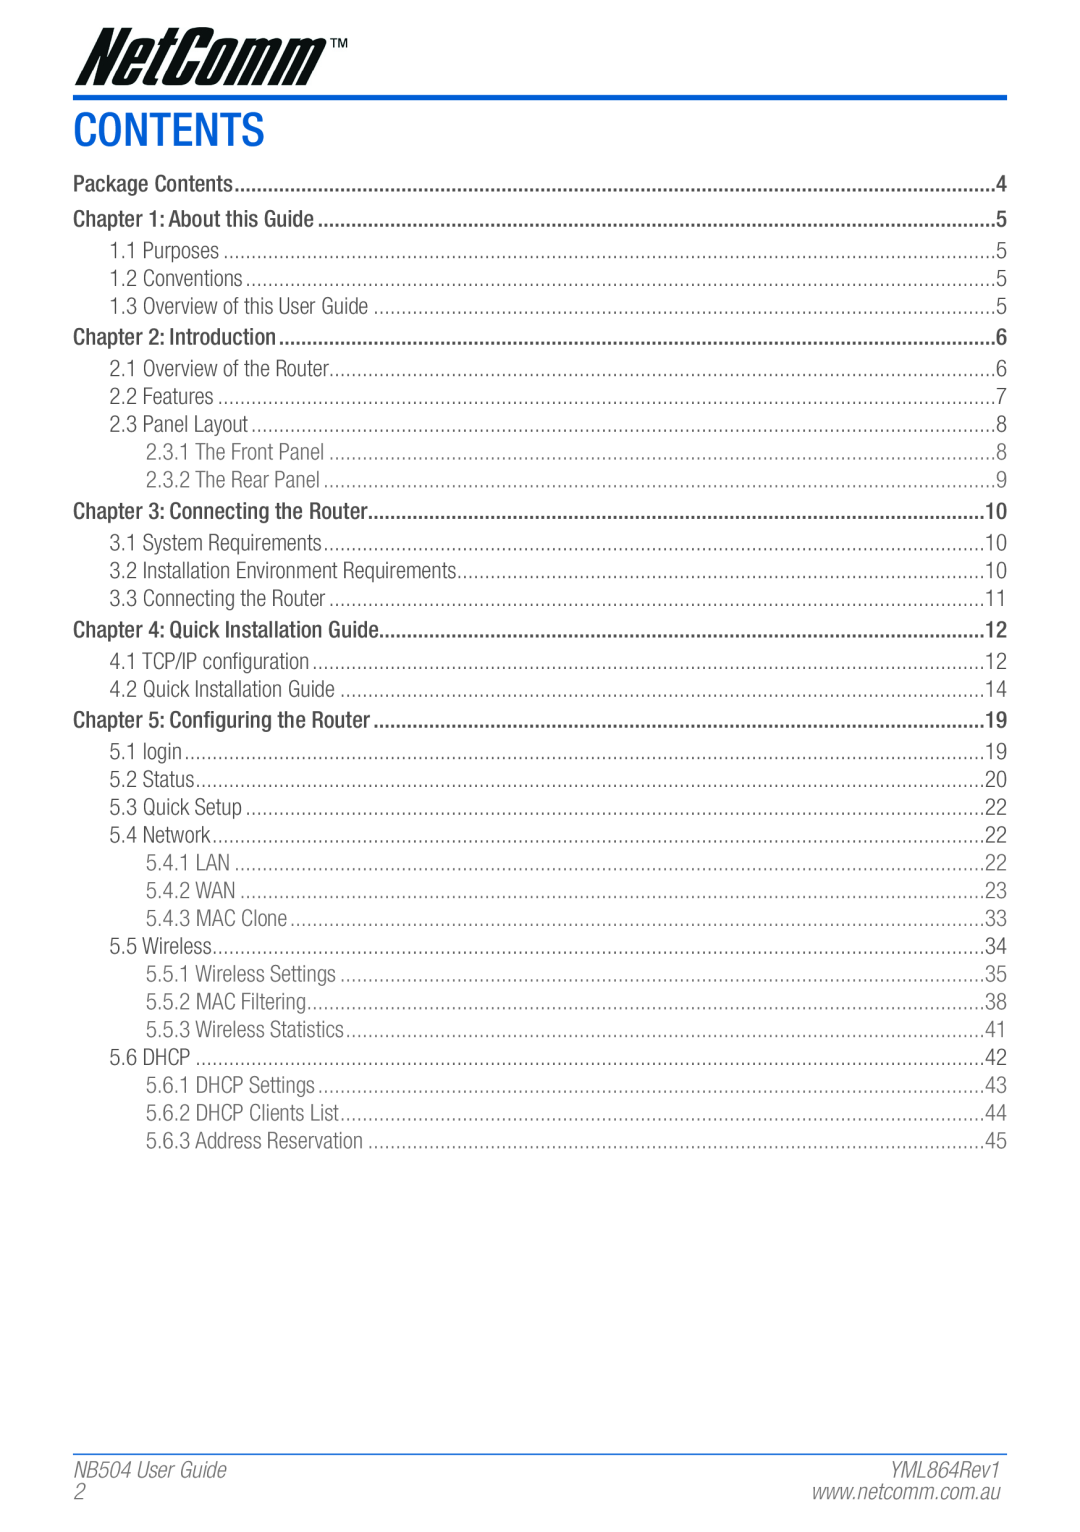 NetComm manual Contents, NB504 User Guide 